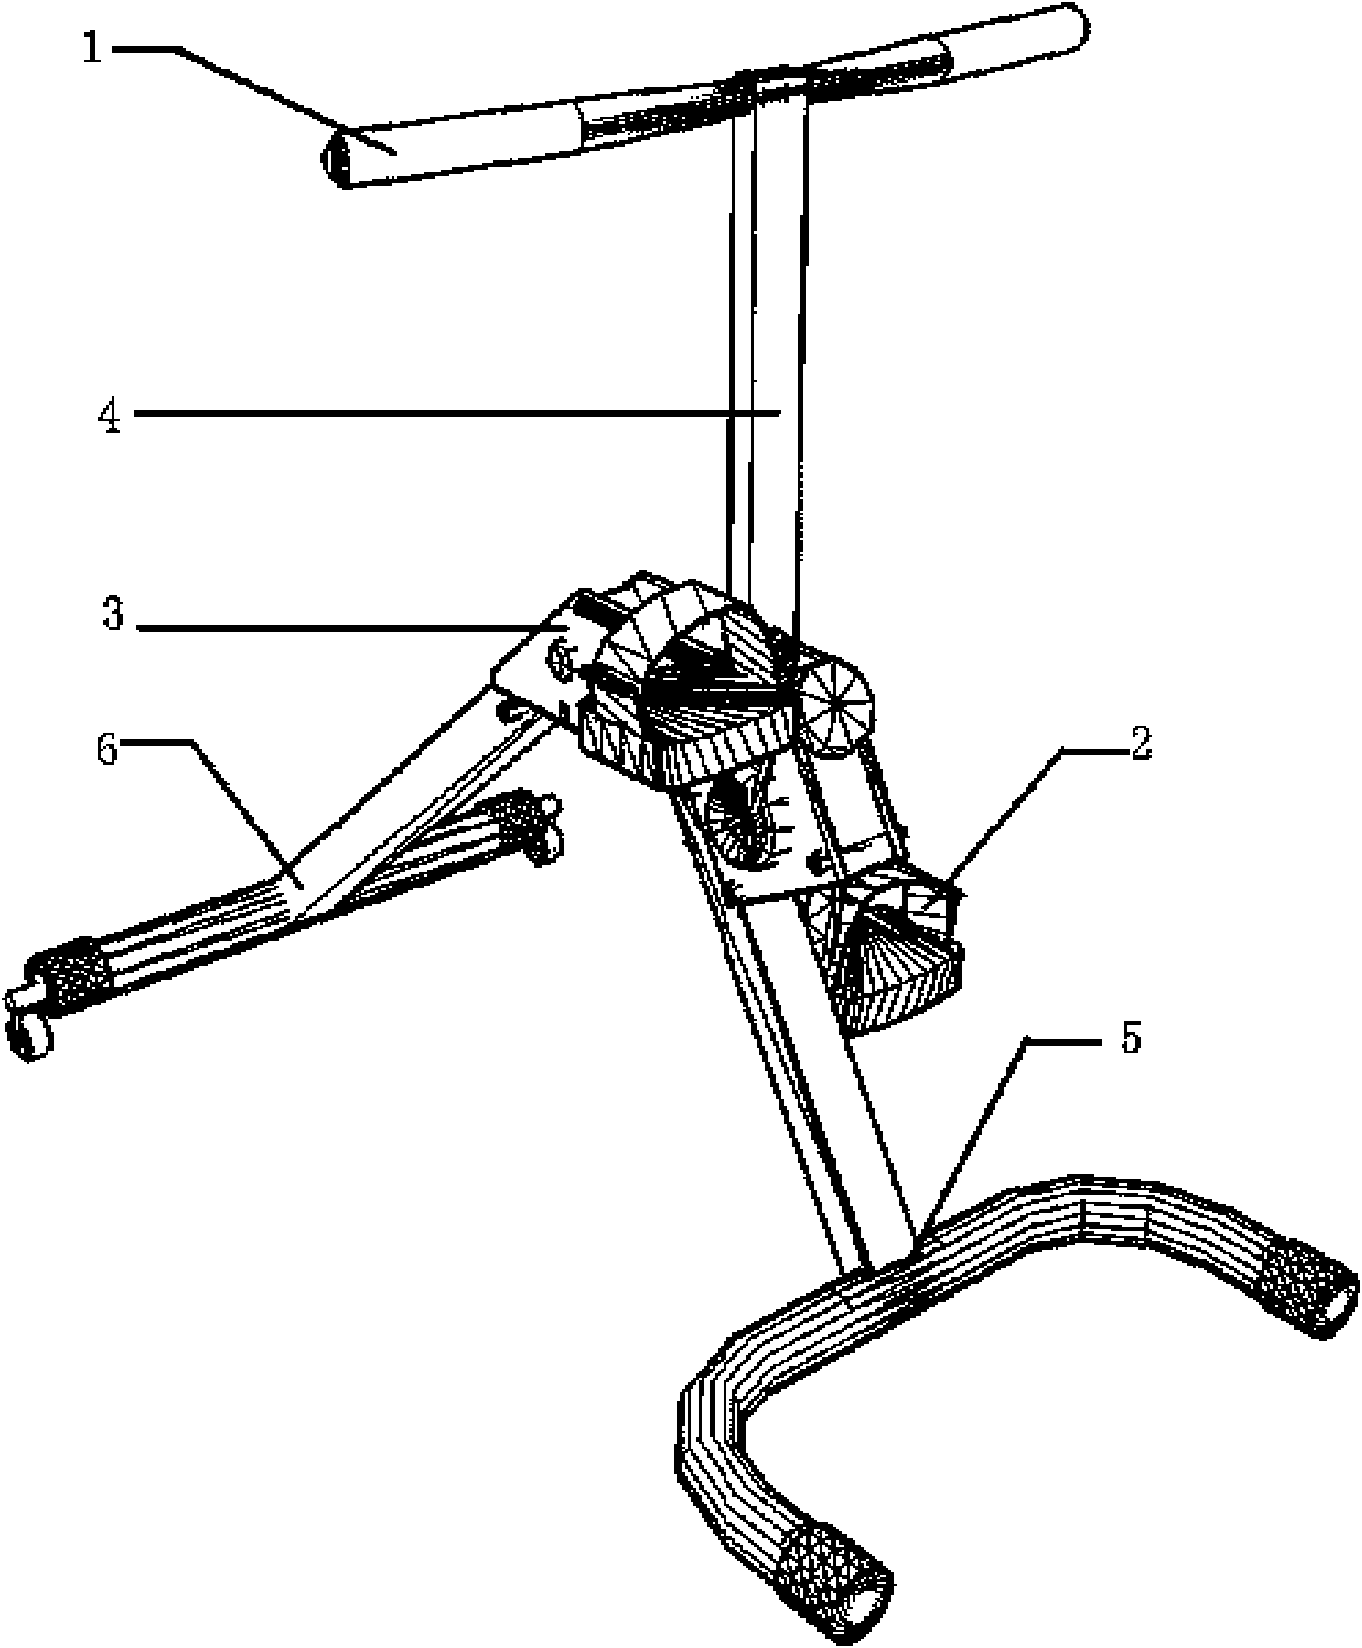 Load-free knee joint function rehabilitation device